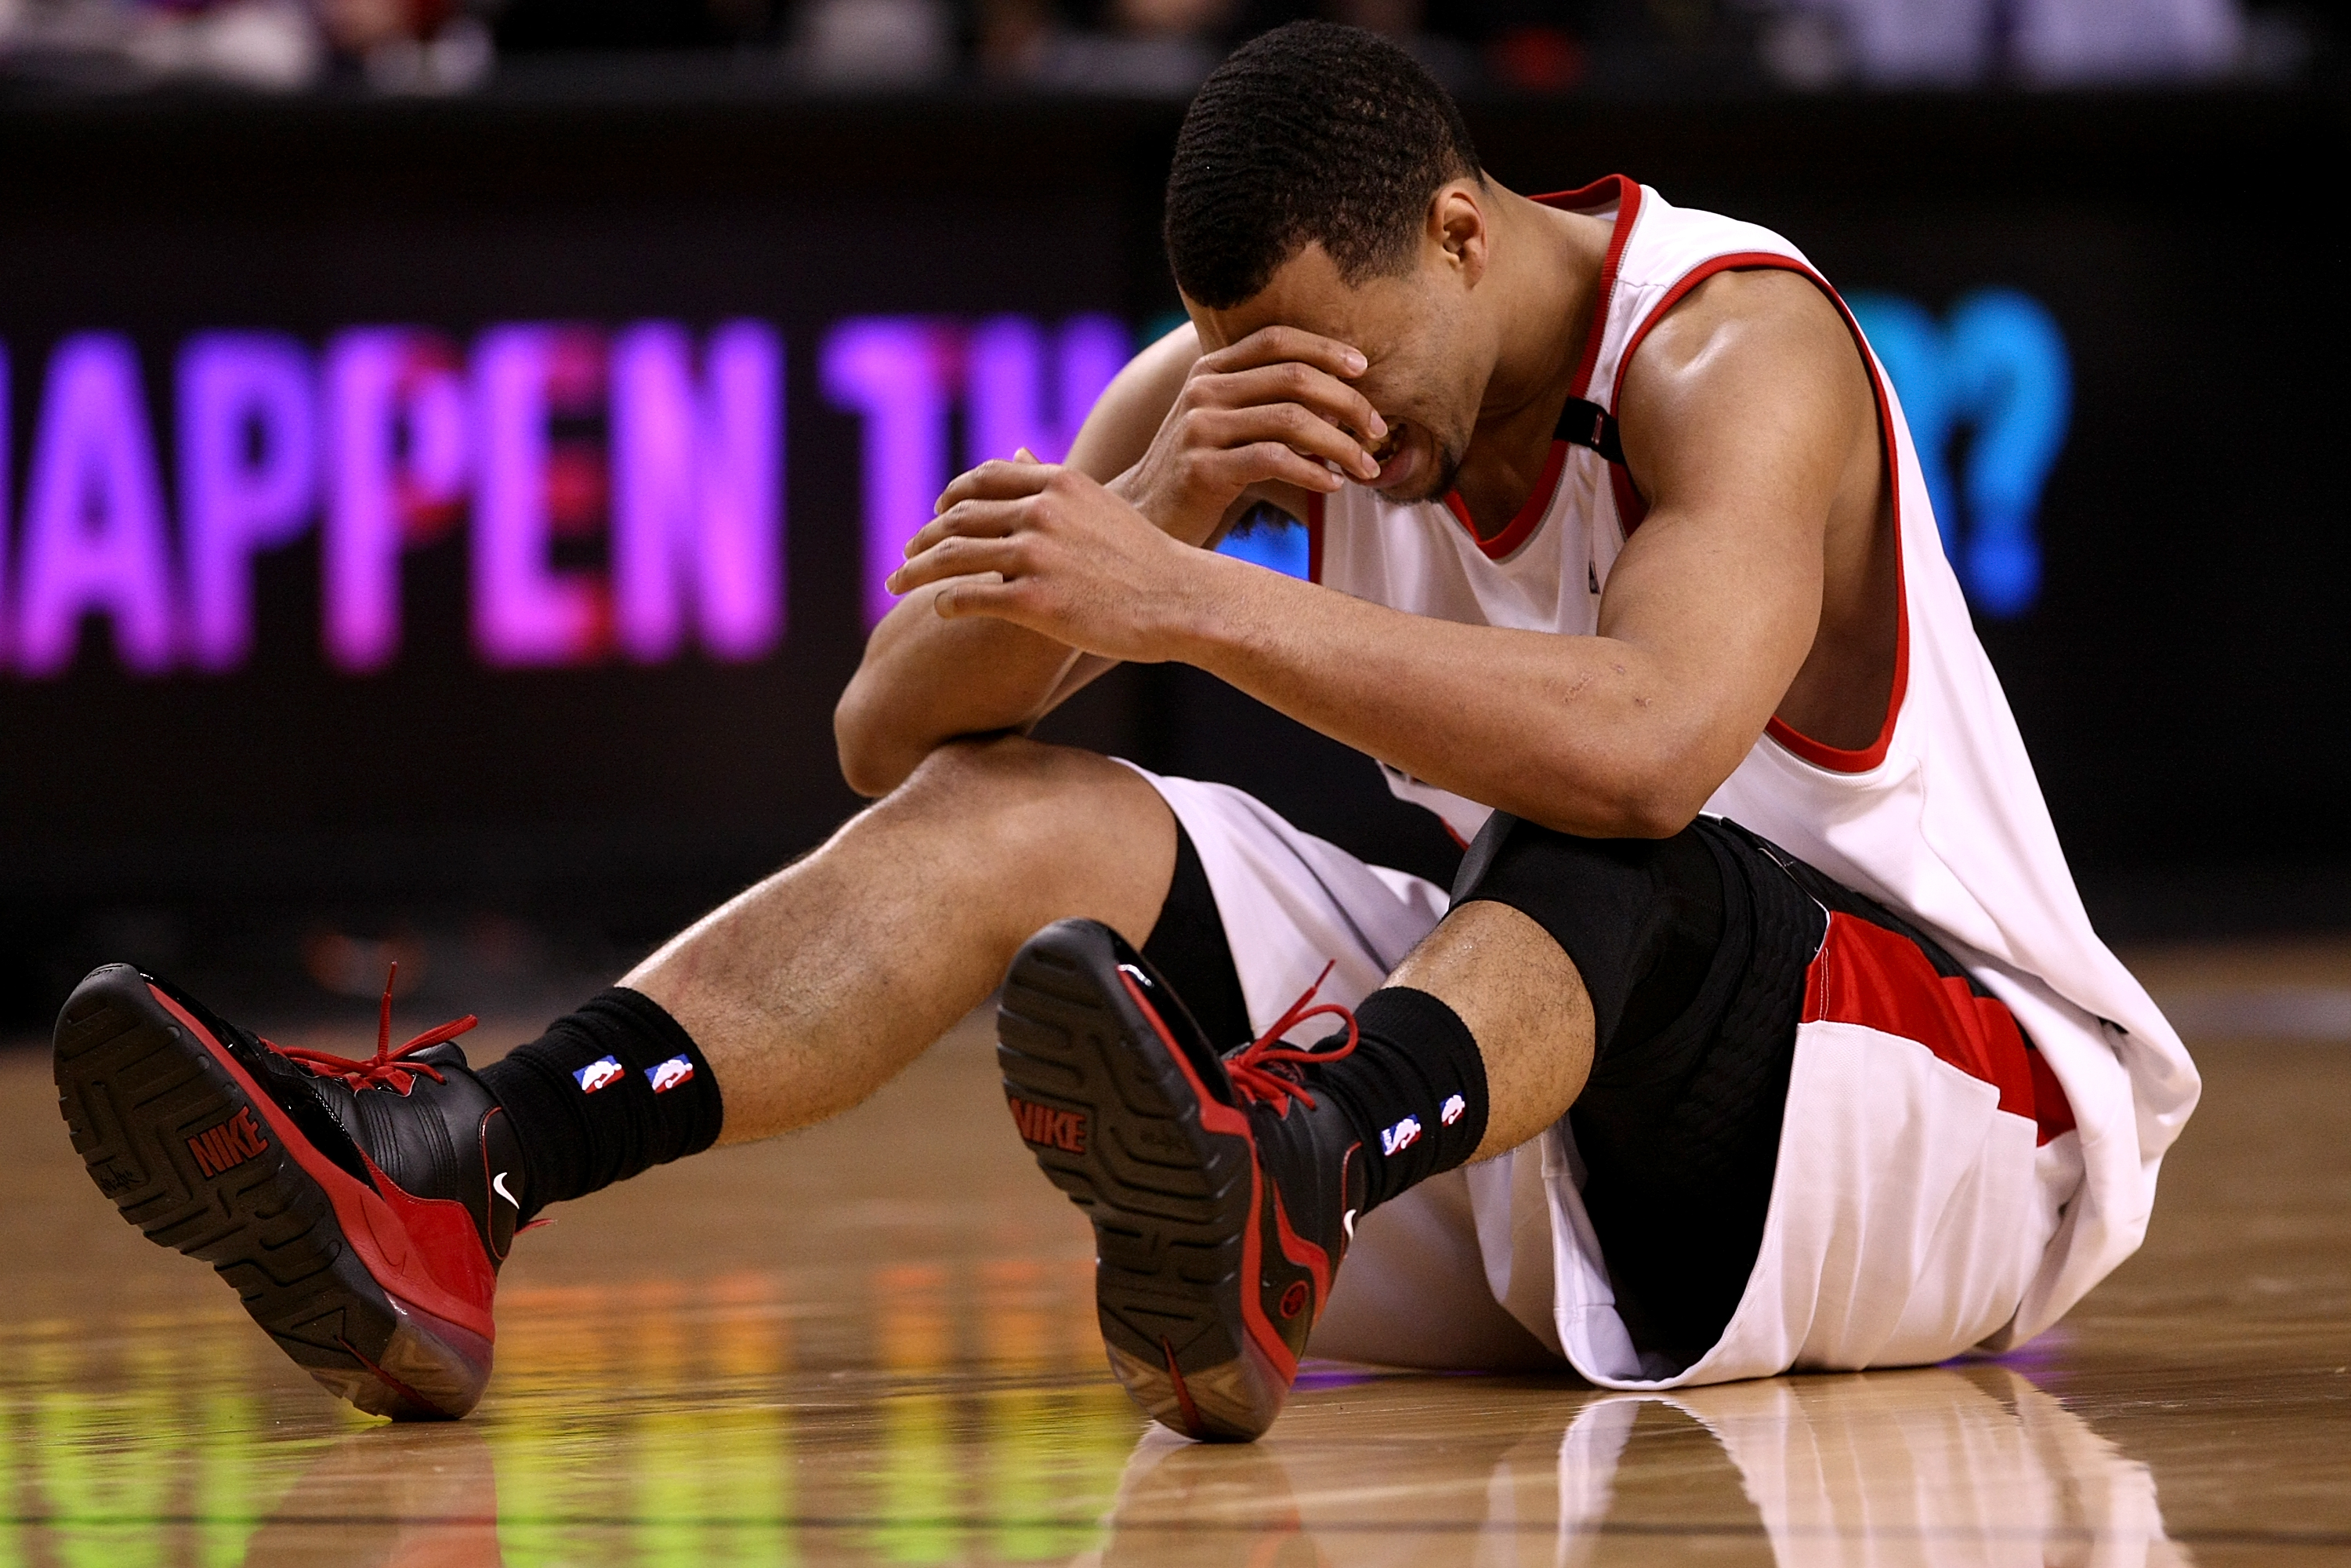 Brandon Roy Would've Been a HOF if Not for Injuries - Pro Sports